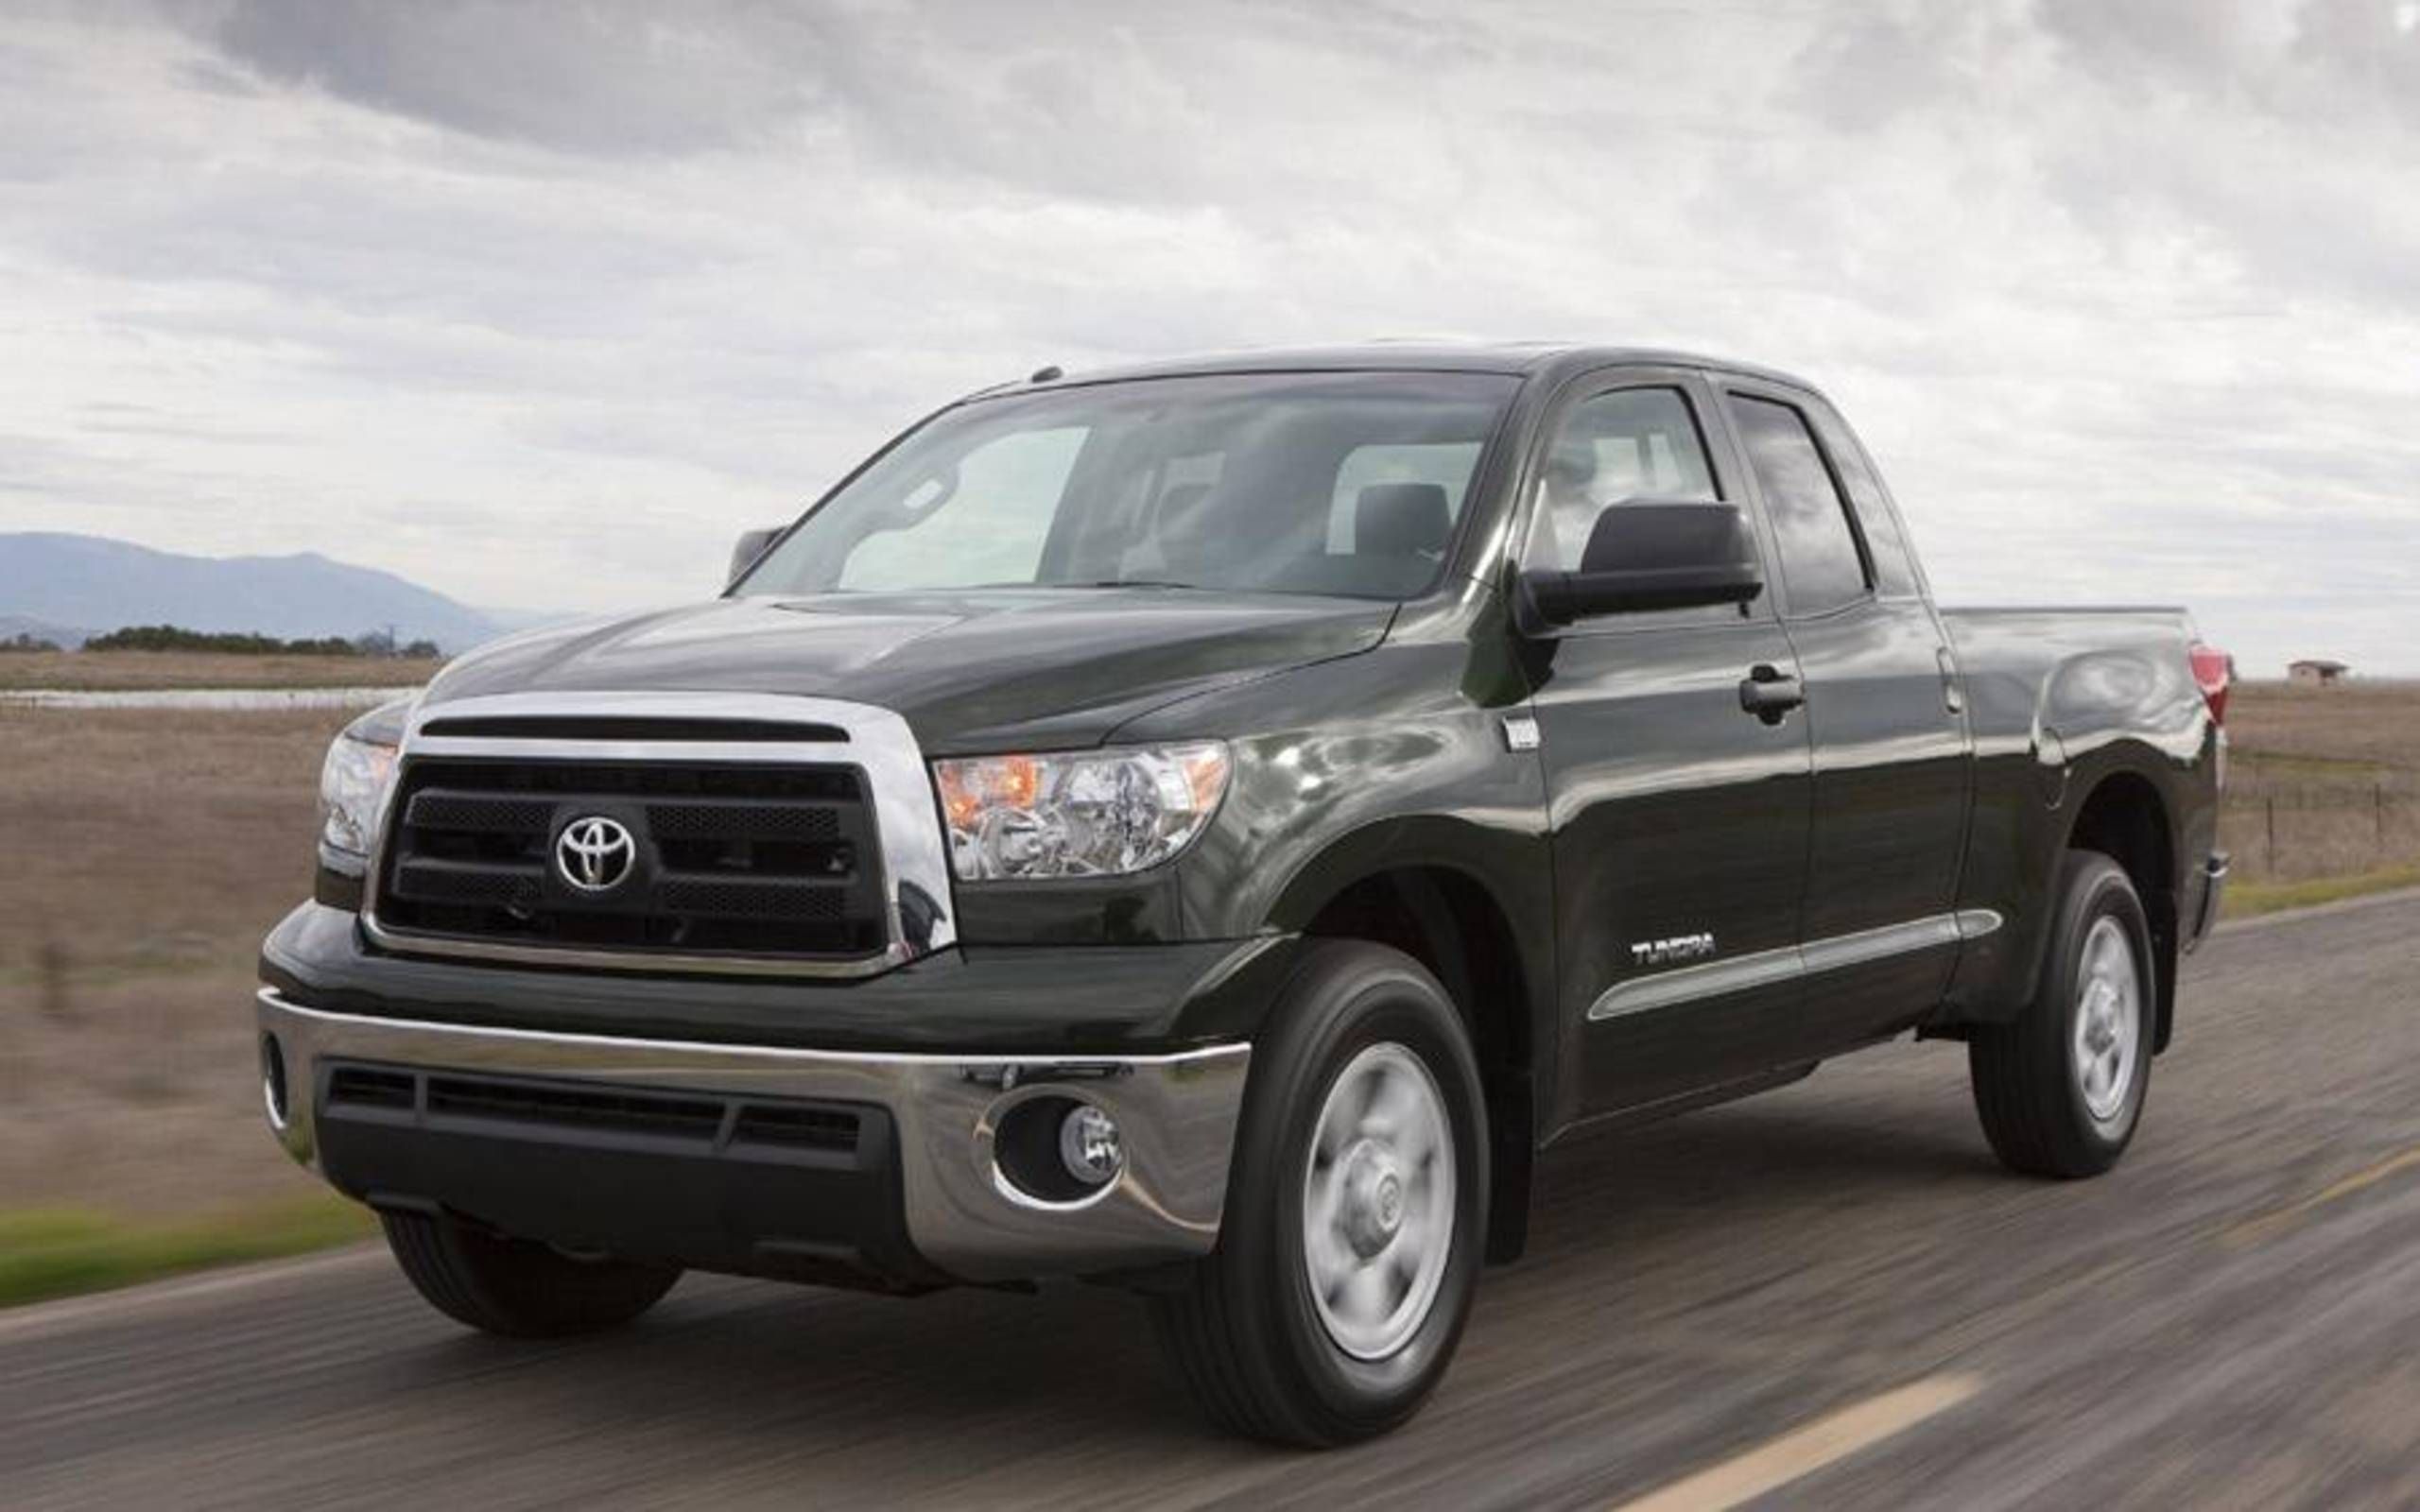 Top Reviews: 2011 Toyota Tundra – Unbiased Feedback & User Comments